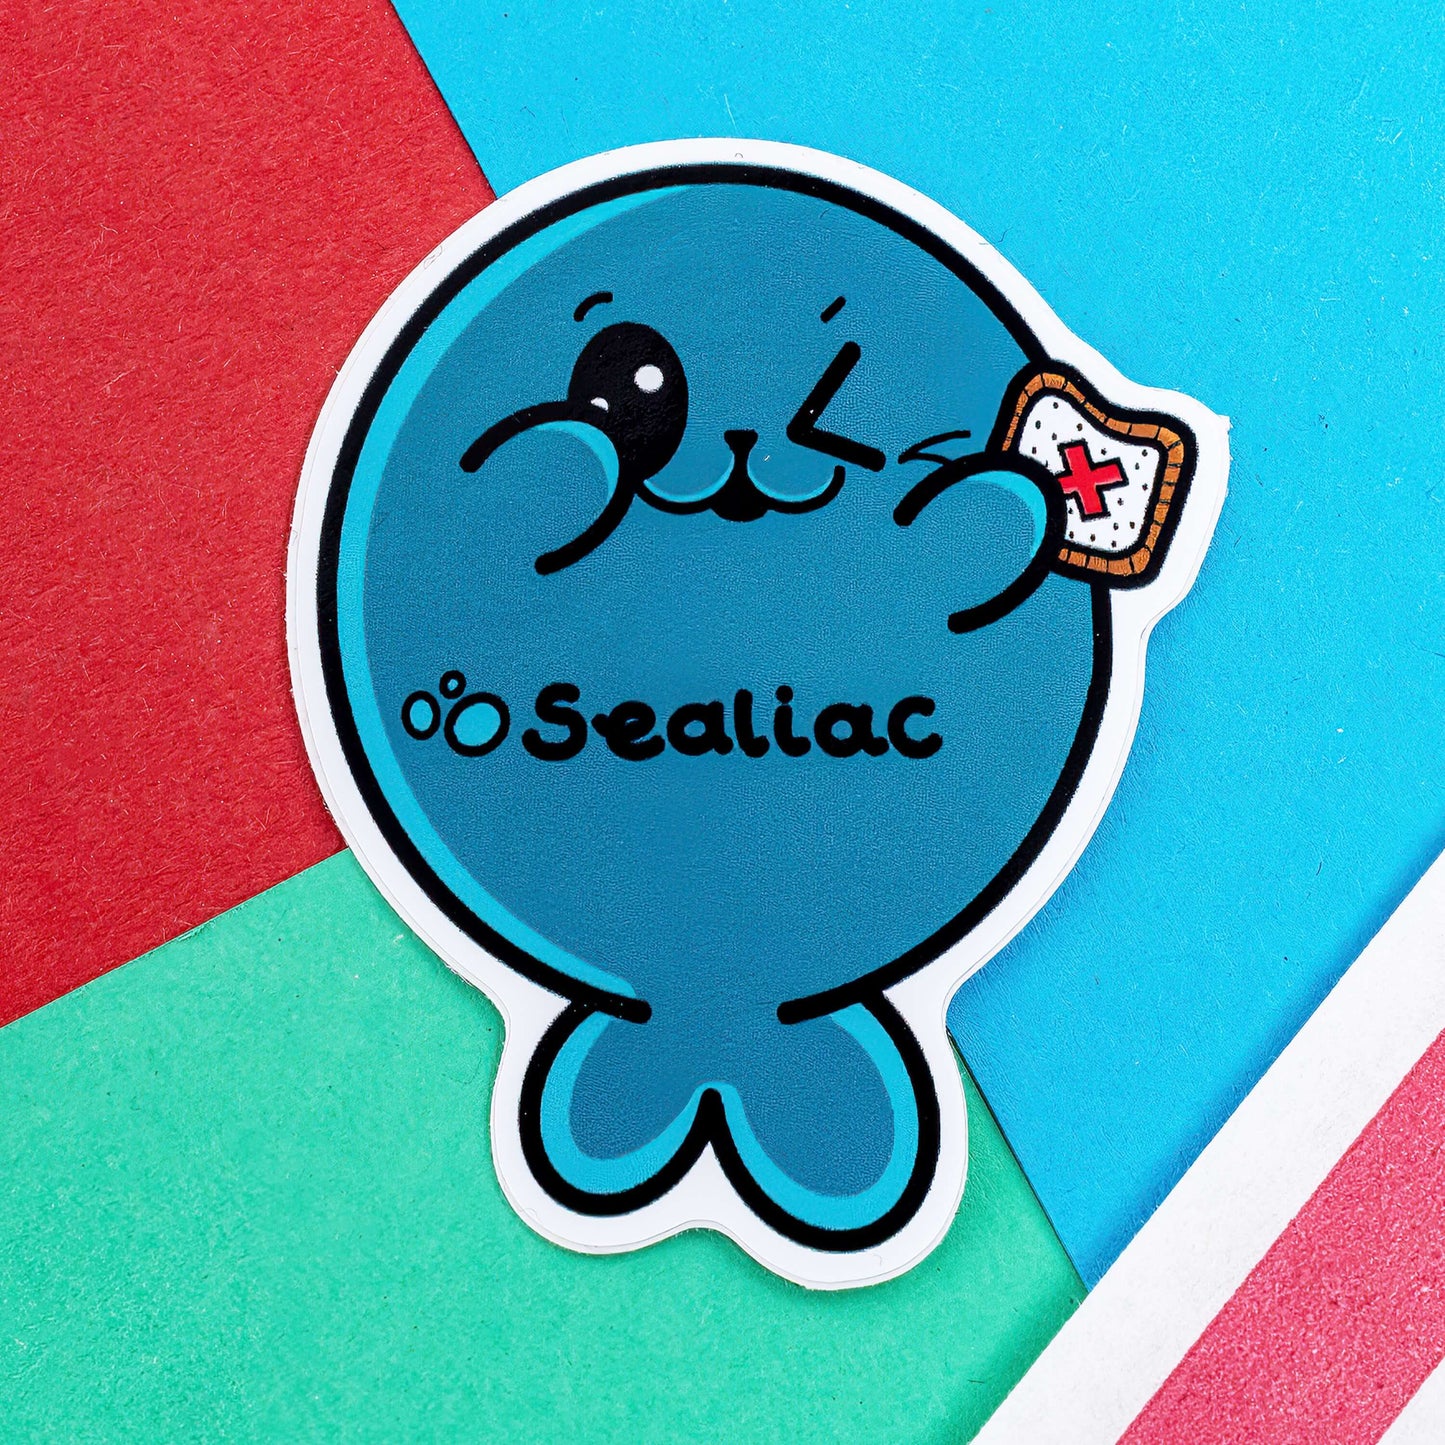 The Sealiac Seal Sticker - Coeliac Disease on a red, blue and green background with a red stripe candy bag. The winking blue seal sticker is holding up a piece of toast with a red cross, along its belly in black text reads 'sealiac'. The hand drawn design is raising awareness for Coeliac Disease.